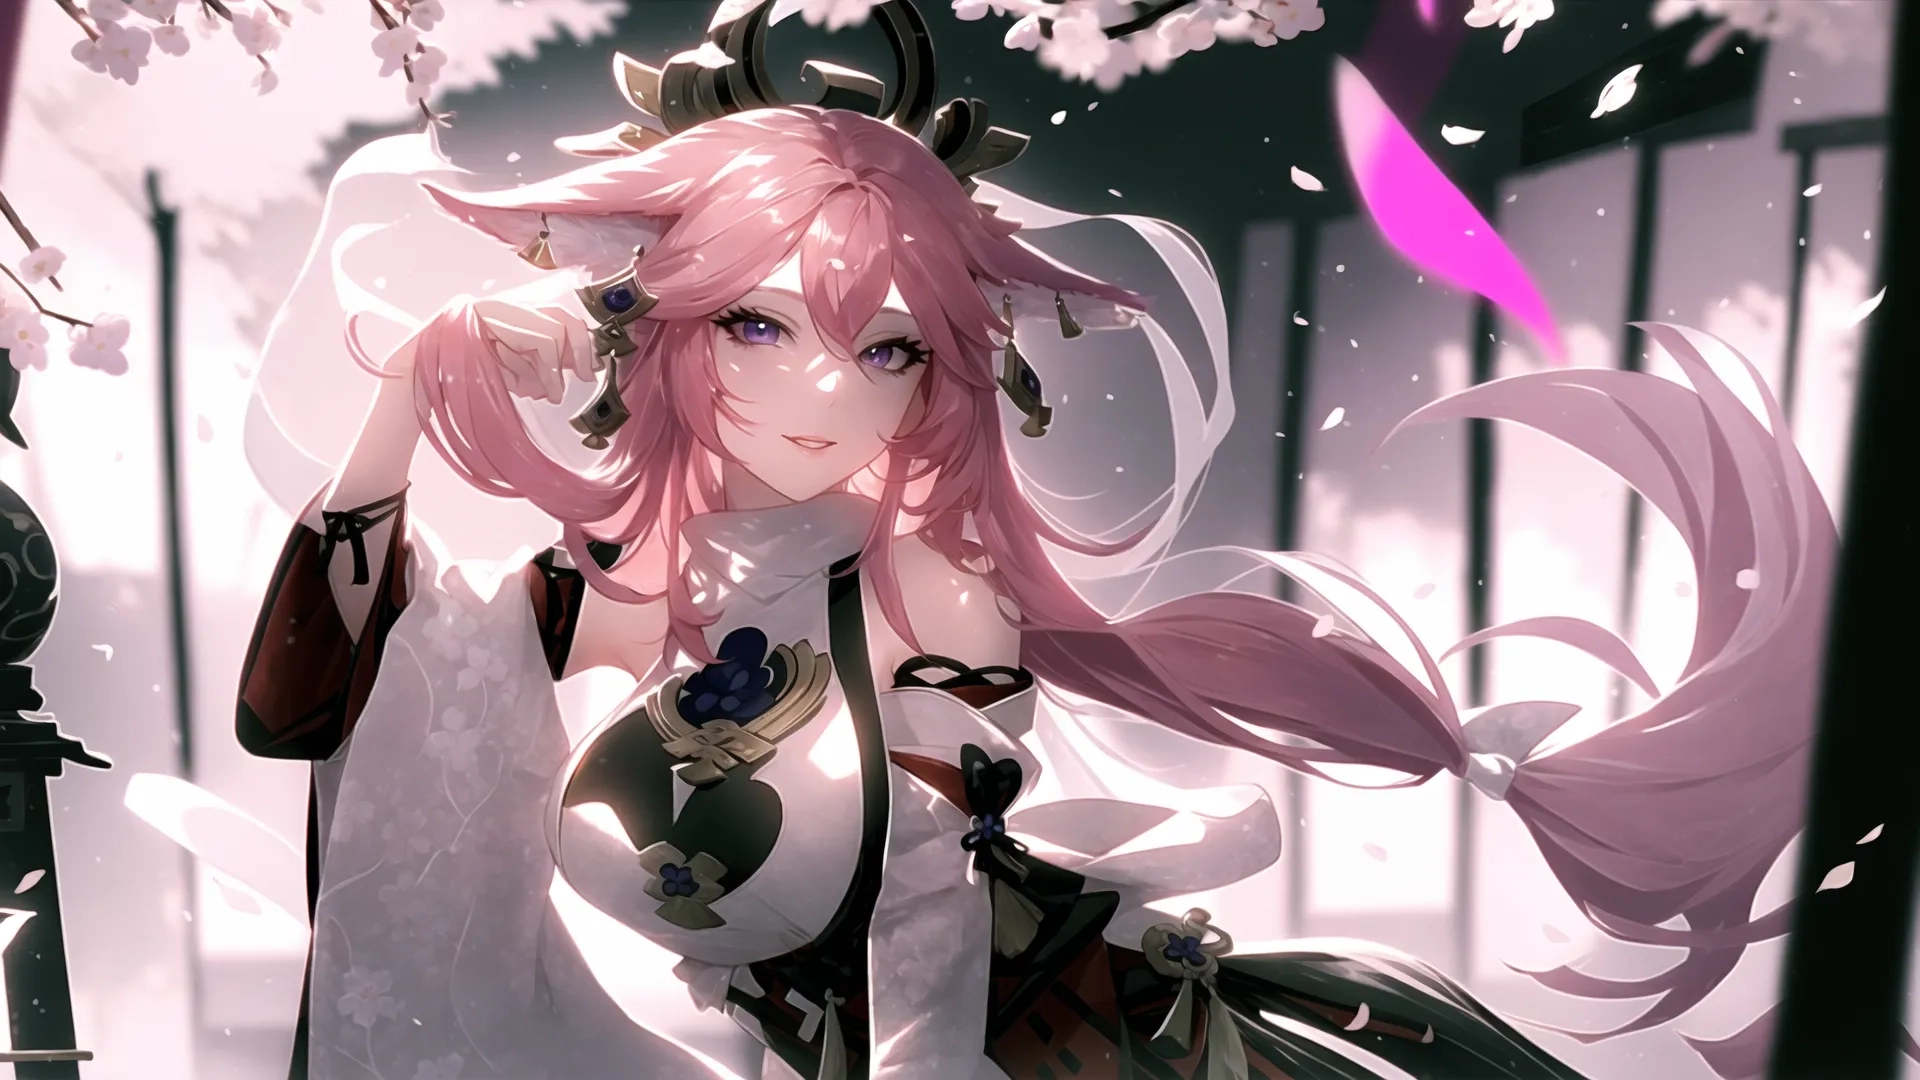 a very pretty lady with pink hair and glasses wearing a dress and holding a small knife and a large sword on her back holding a pink umbrella
